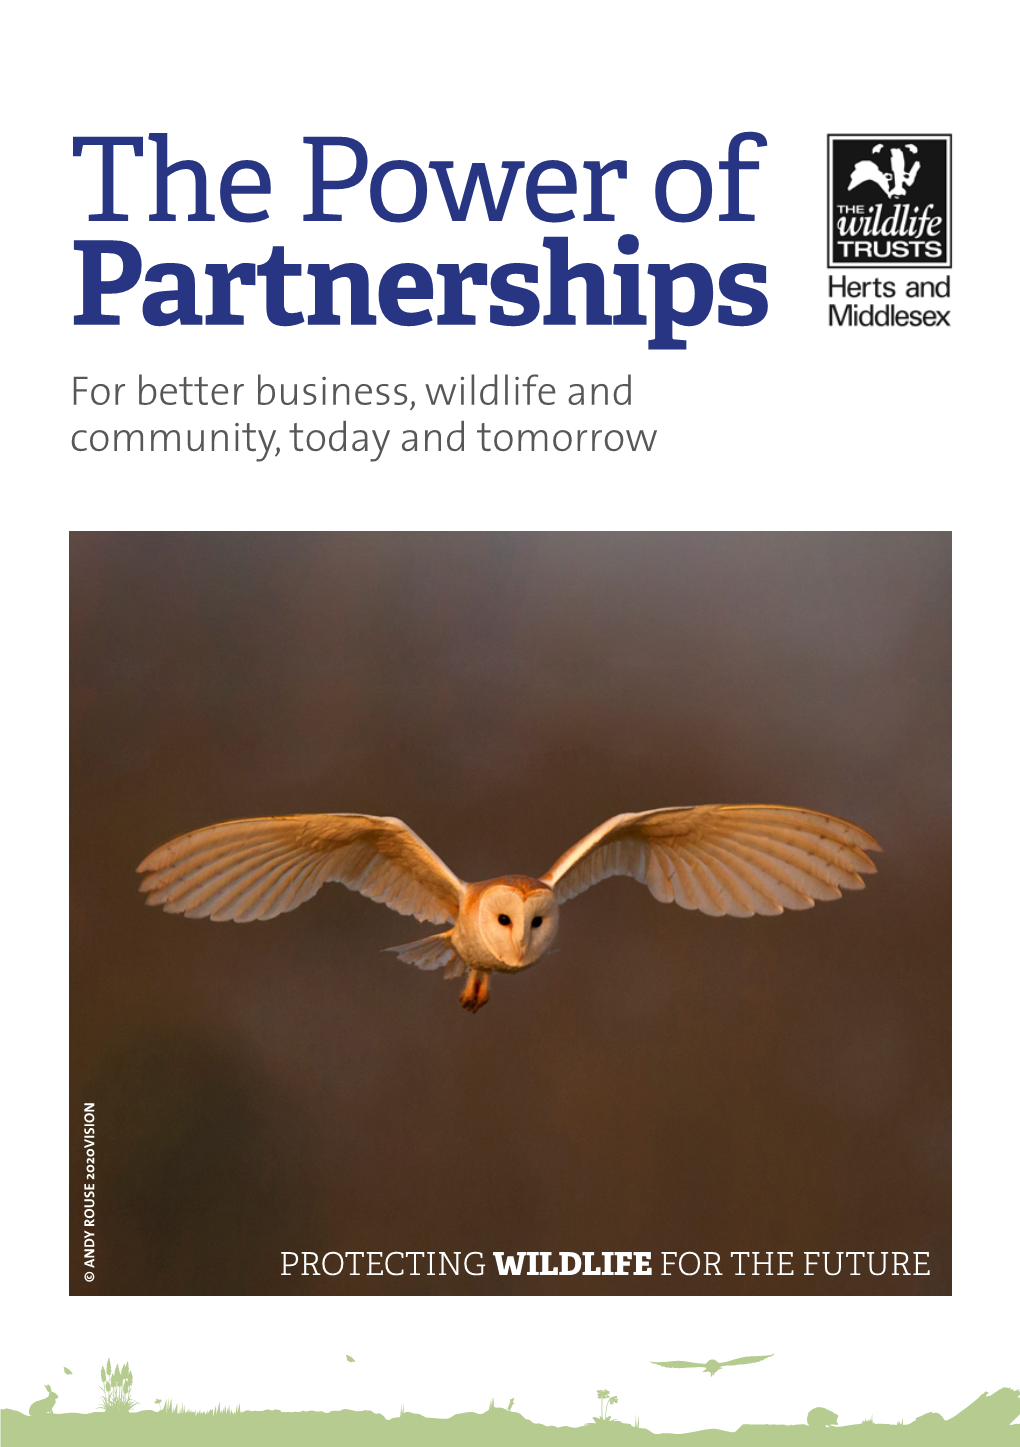 The Power of Partnerships for Better Business, Wildlife and Community, Today and Tomorrow